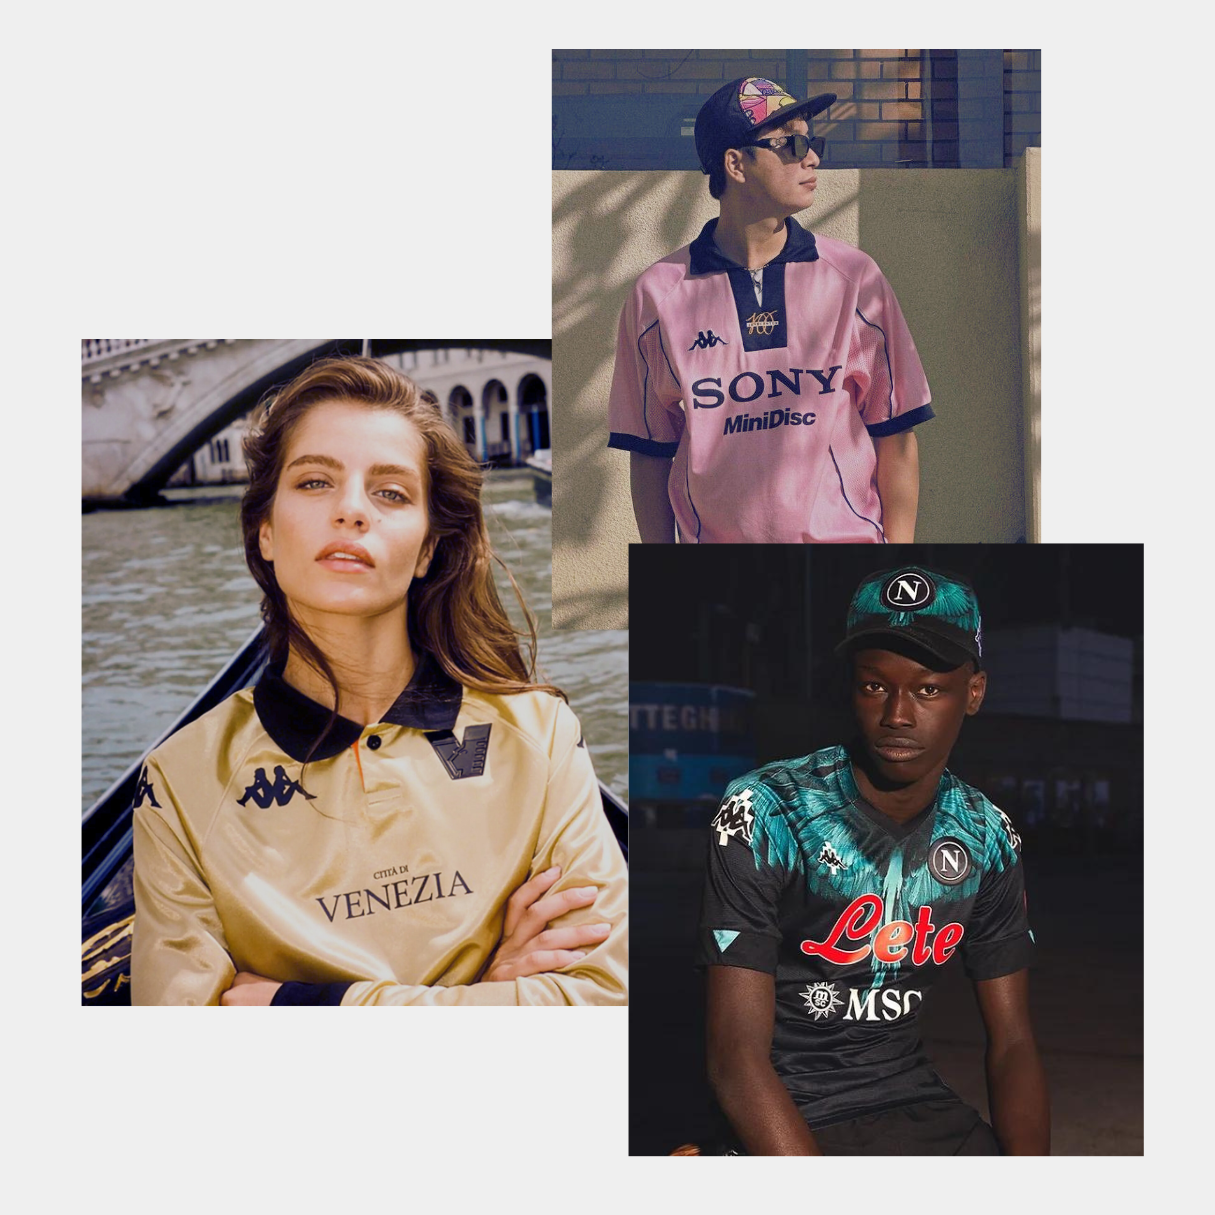 Premium Concept Football Shirts and Retro Kits. Explore our range of club & national jerseys to level up your collection. Premium quality and Free Worldwide shipping. www.kennyskits.com